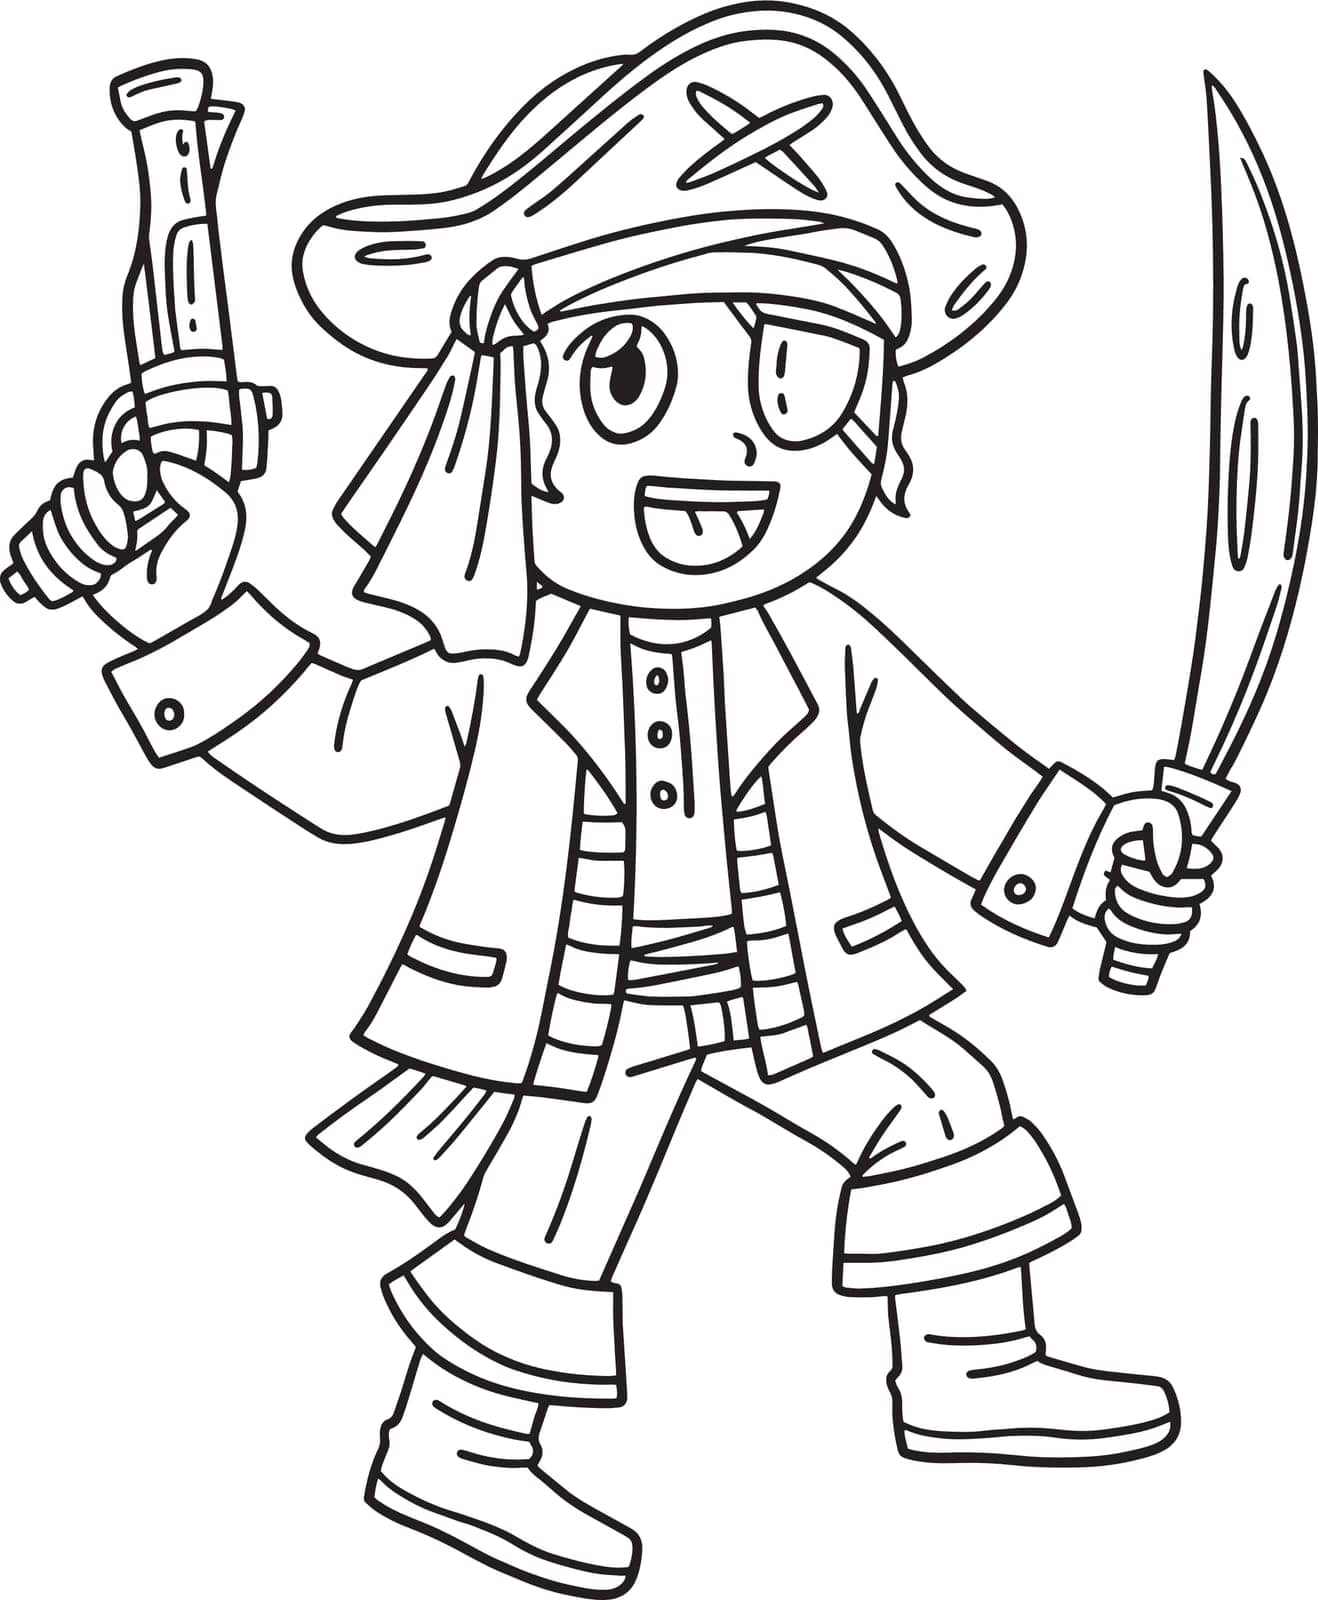 Pirate with Gun and Cutlass Isolated Coloring Page by abbydesign